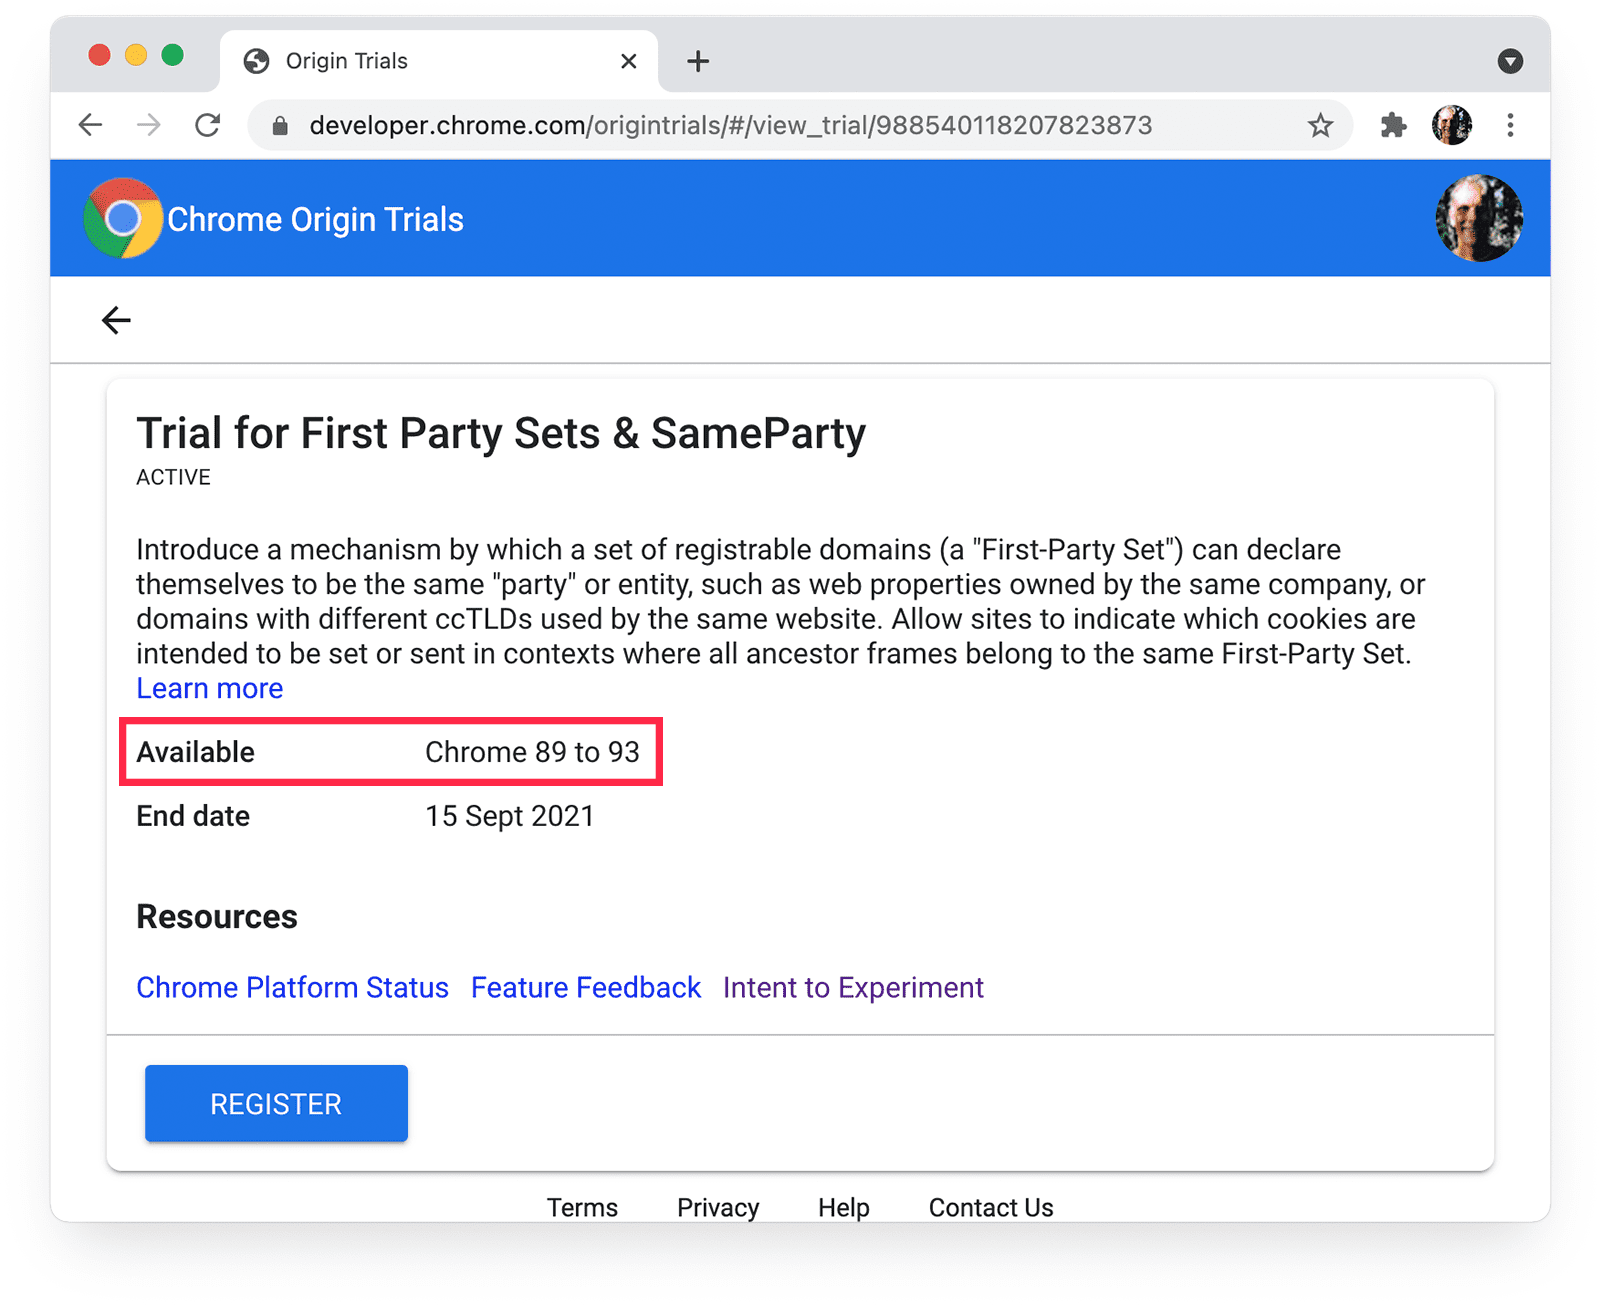 Chrome Origin Trials
page for First Party Sets & SameParty with Chrome availability highlighted